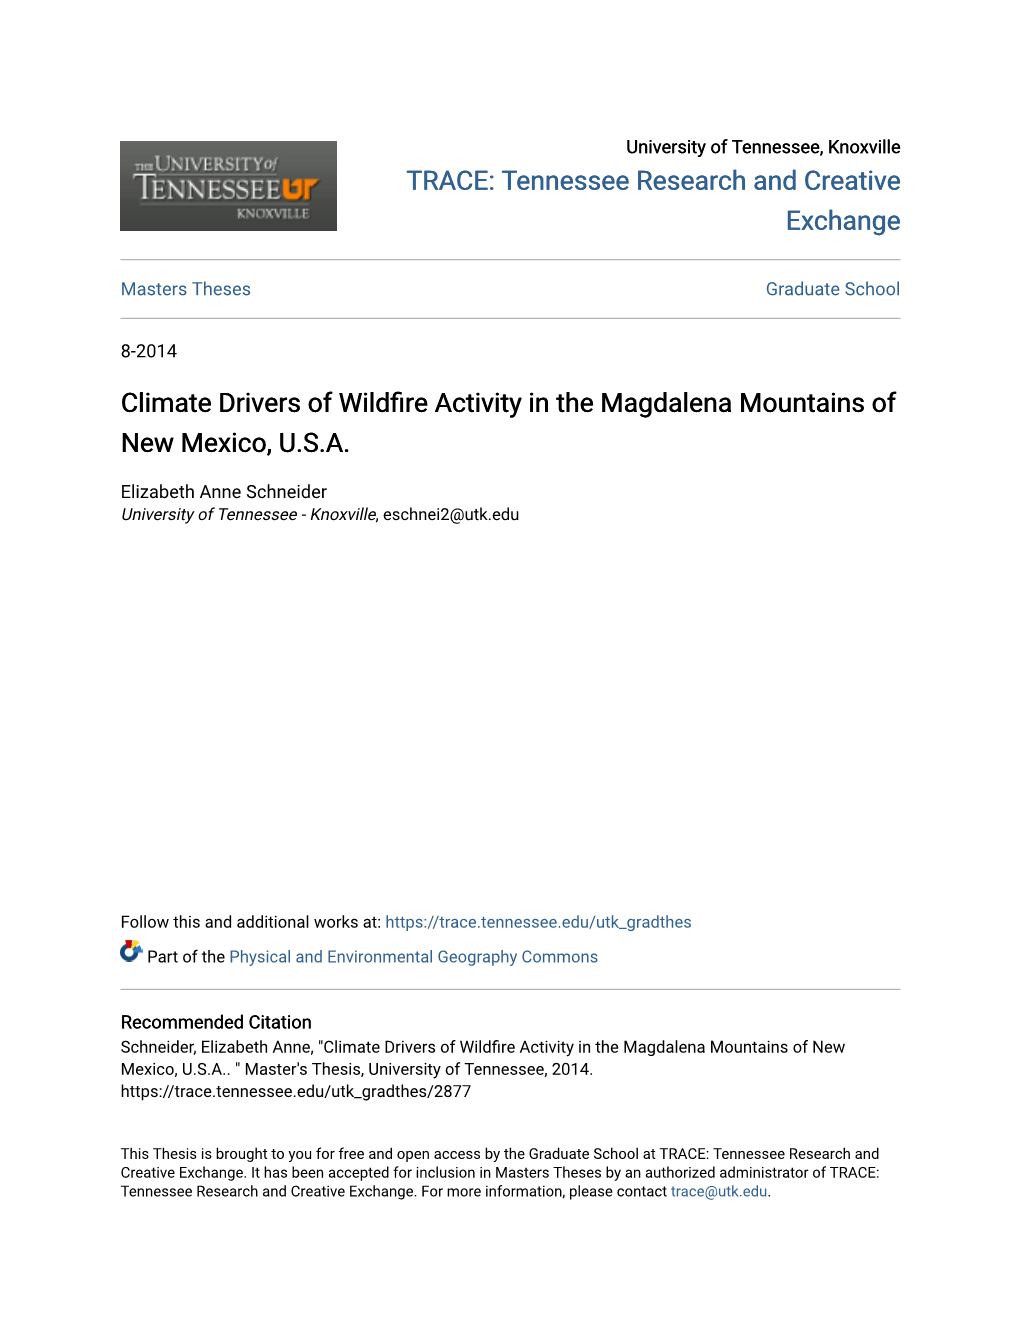 Climate Drivers of Wildfire Activity in the Magdalena Mountains of New Mexico, U.S.A